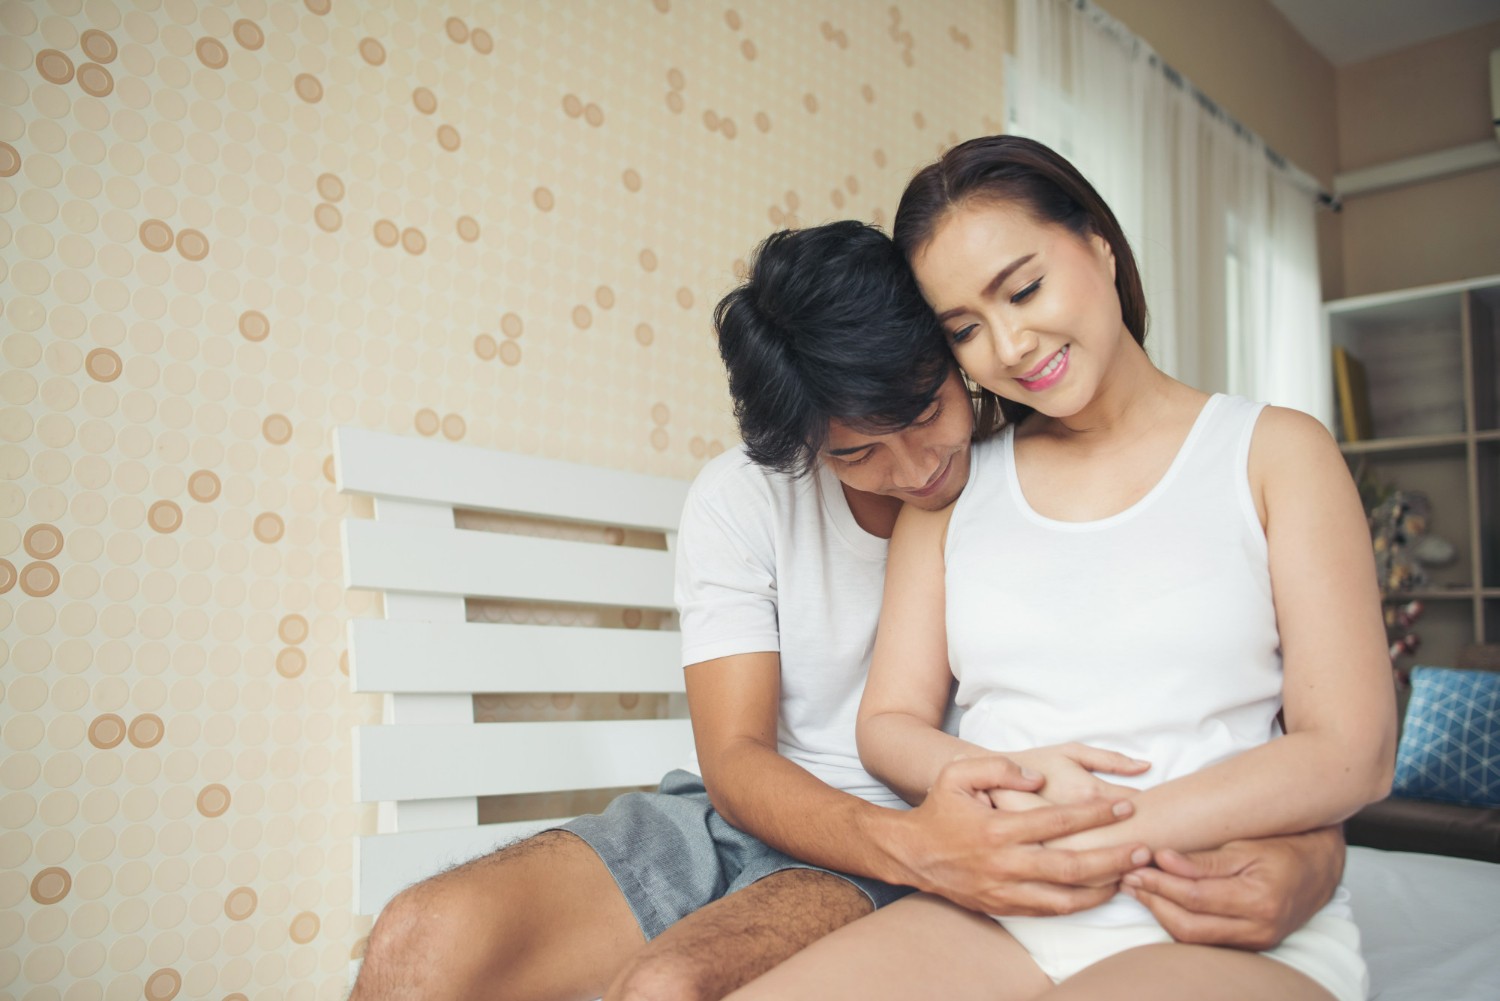 6 Types of Reproductive Hormones You Need to Know